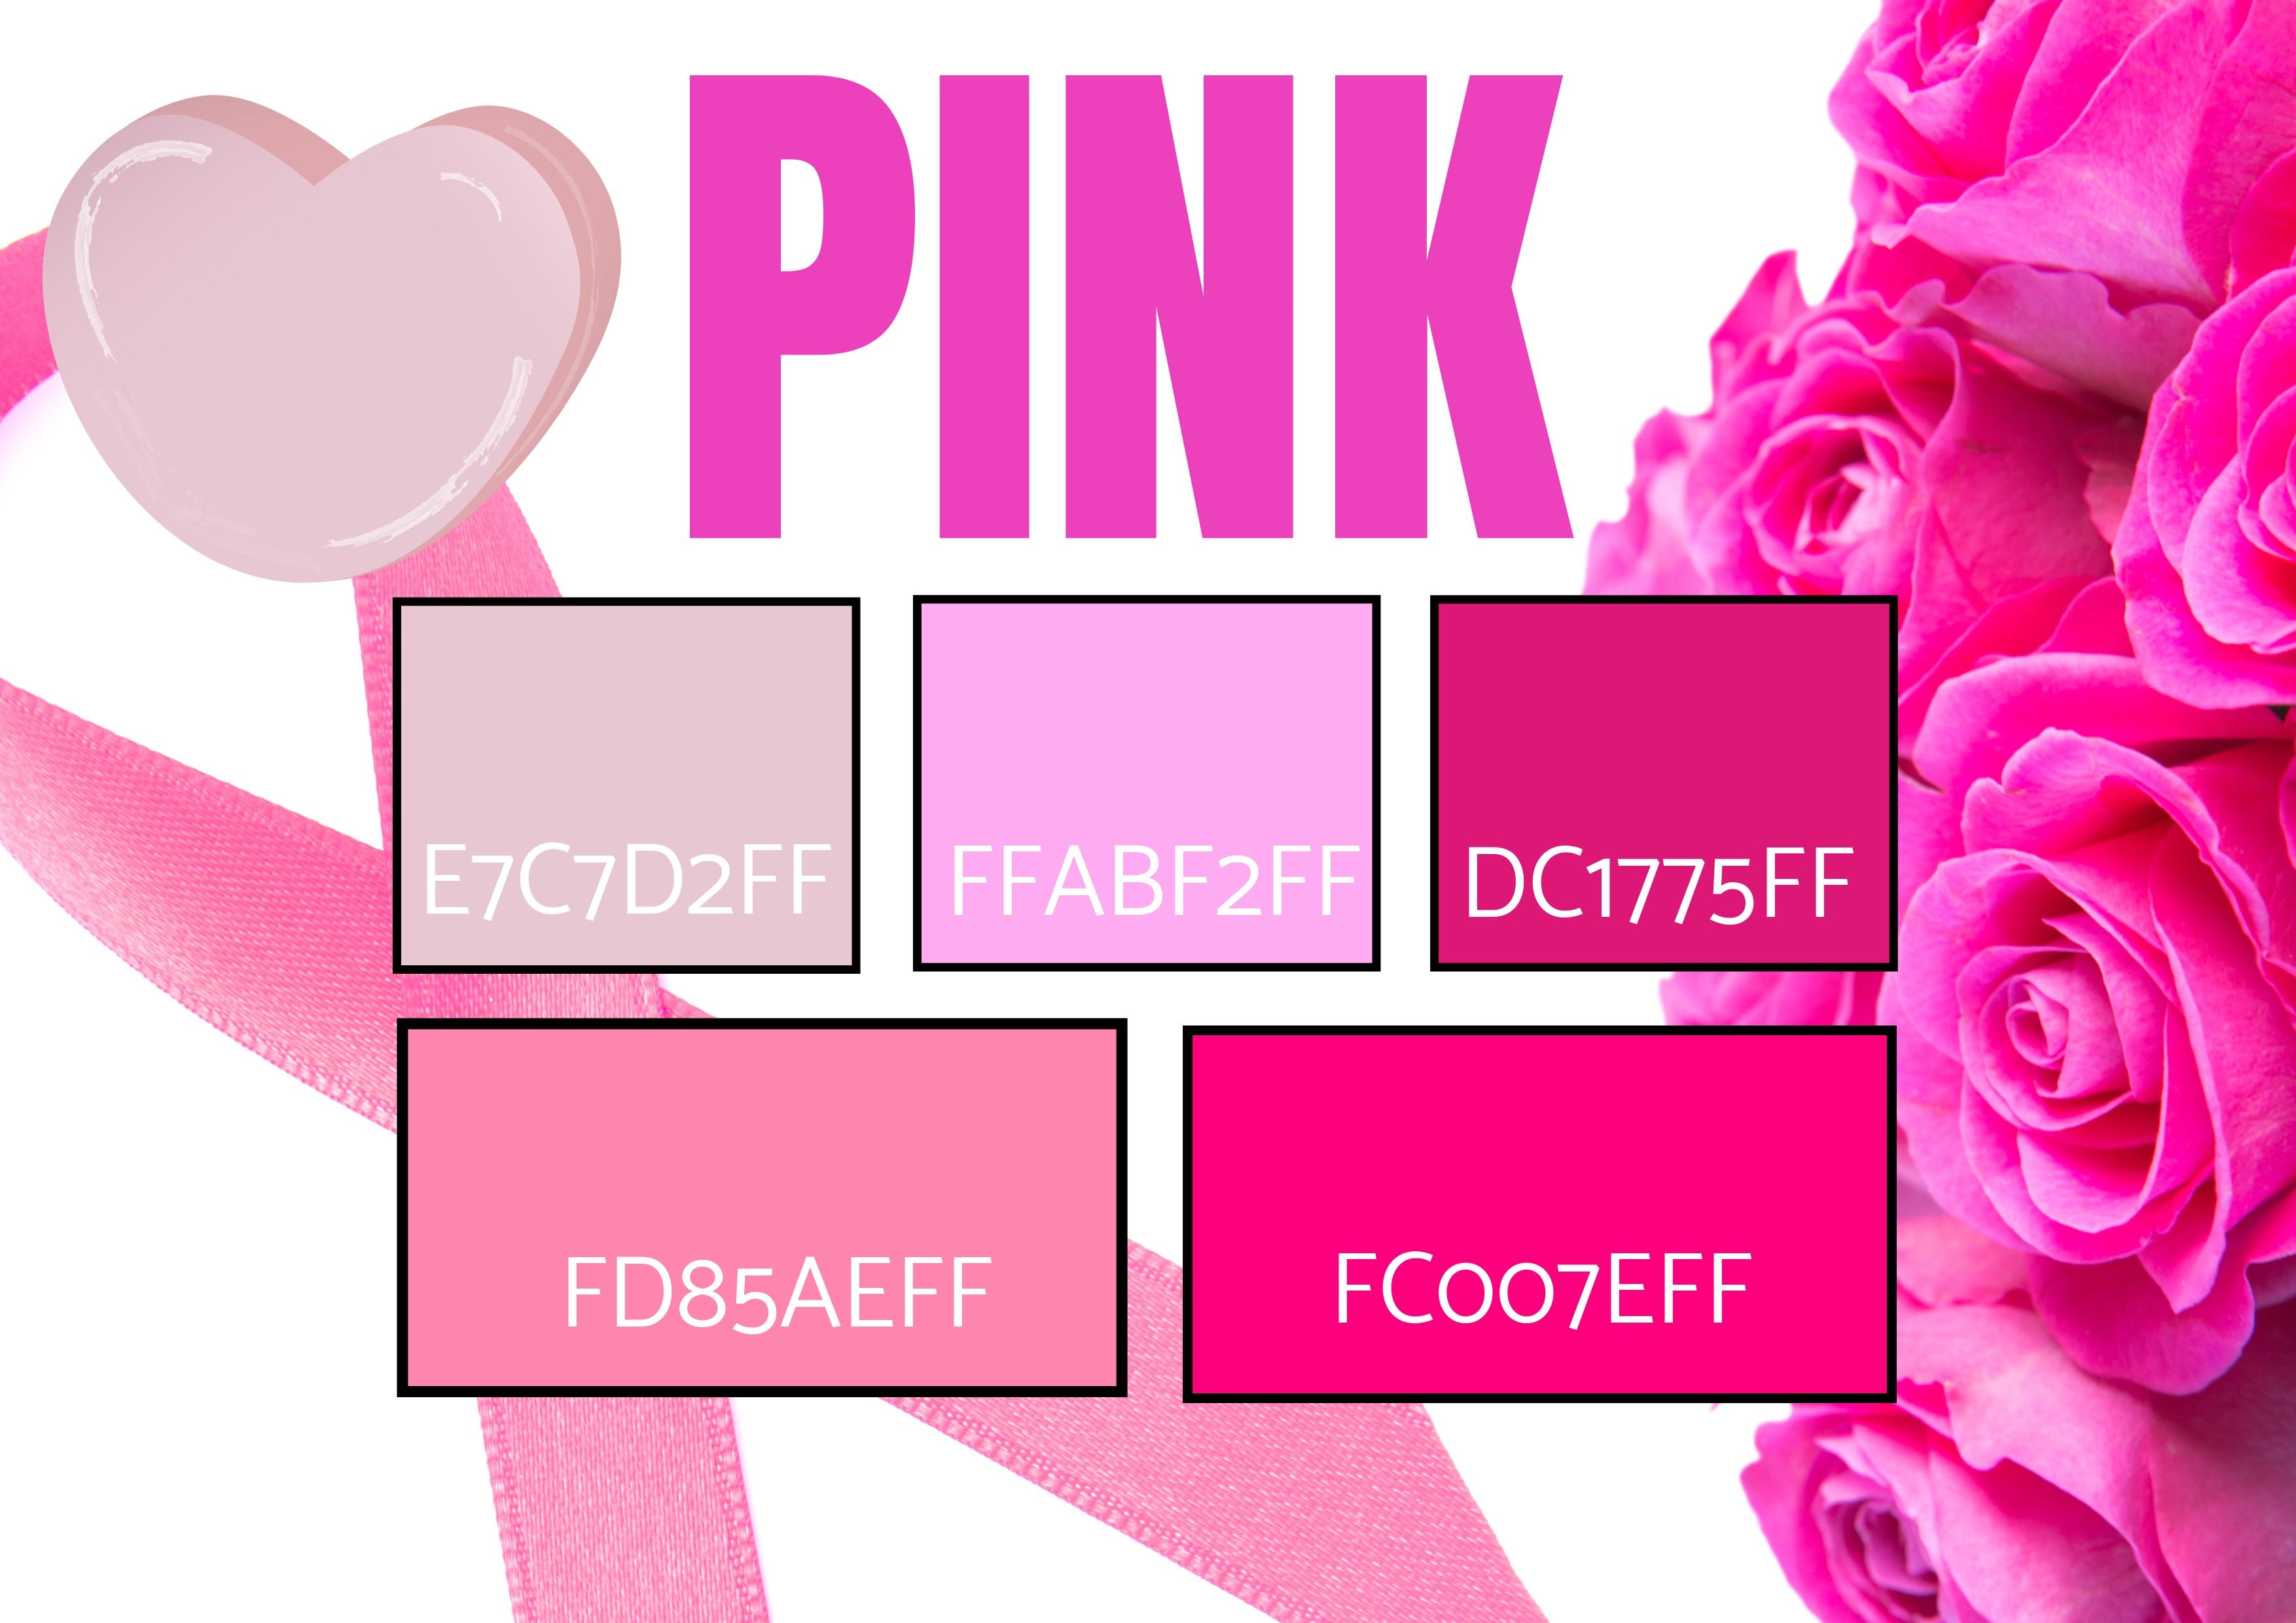 Selection of 5 Pink Shades with images of a breast cancer bow, flowers and heart icon - symbolism - Color theory for designers: The art of using color symbolism - Image